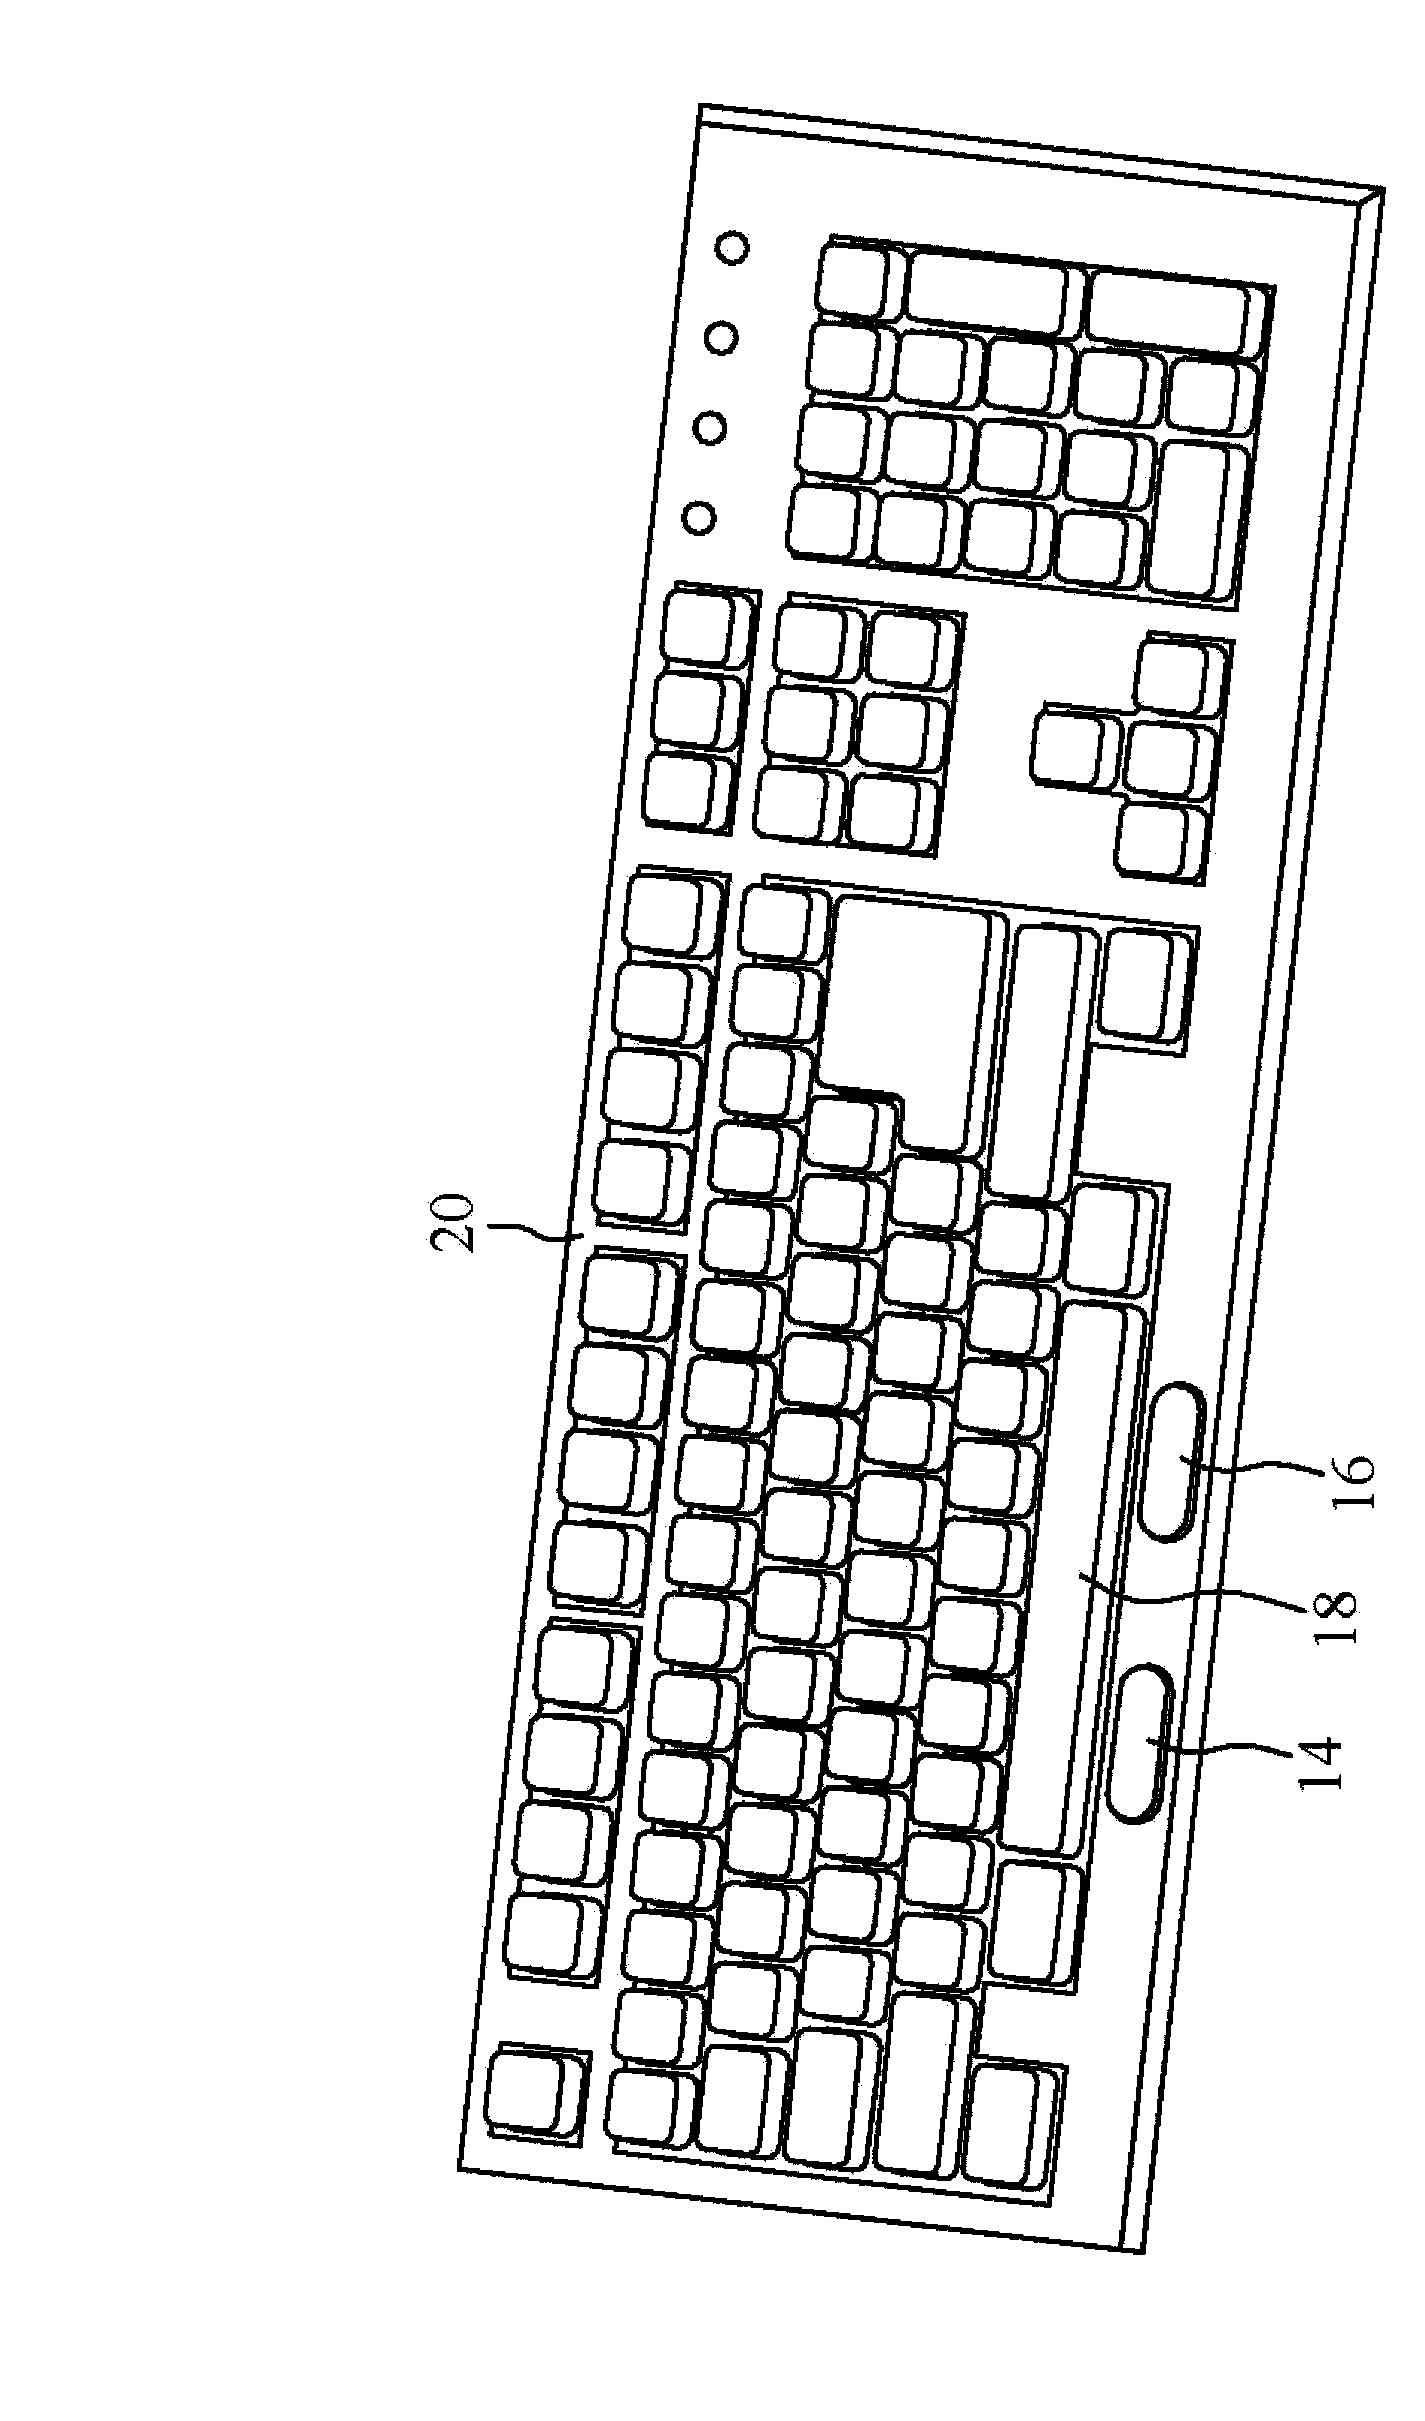 Keyboard with touchpad buttons